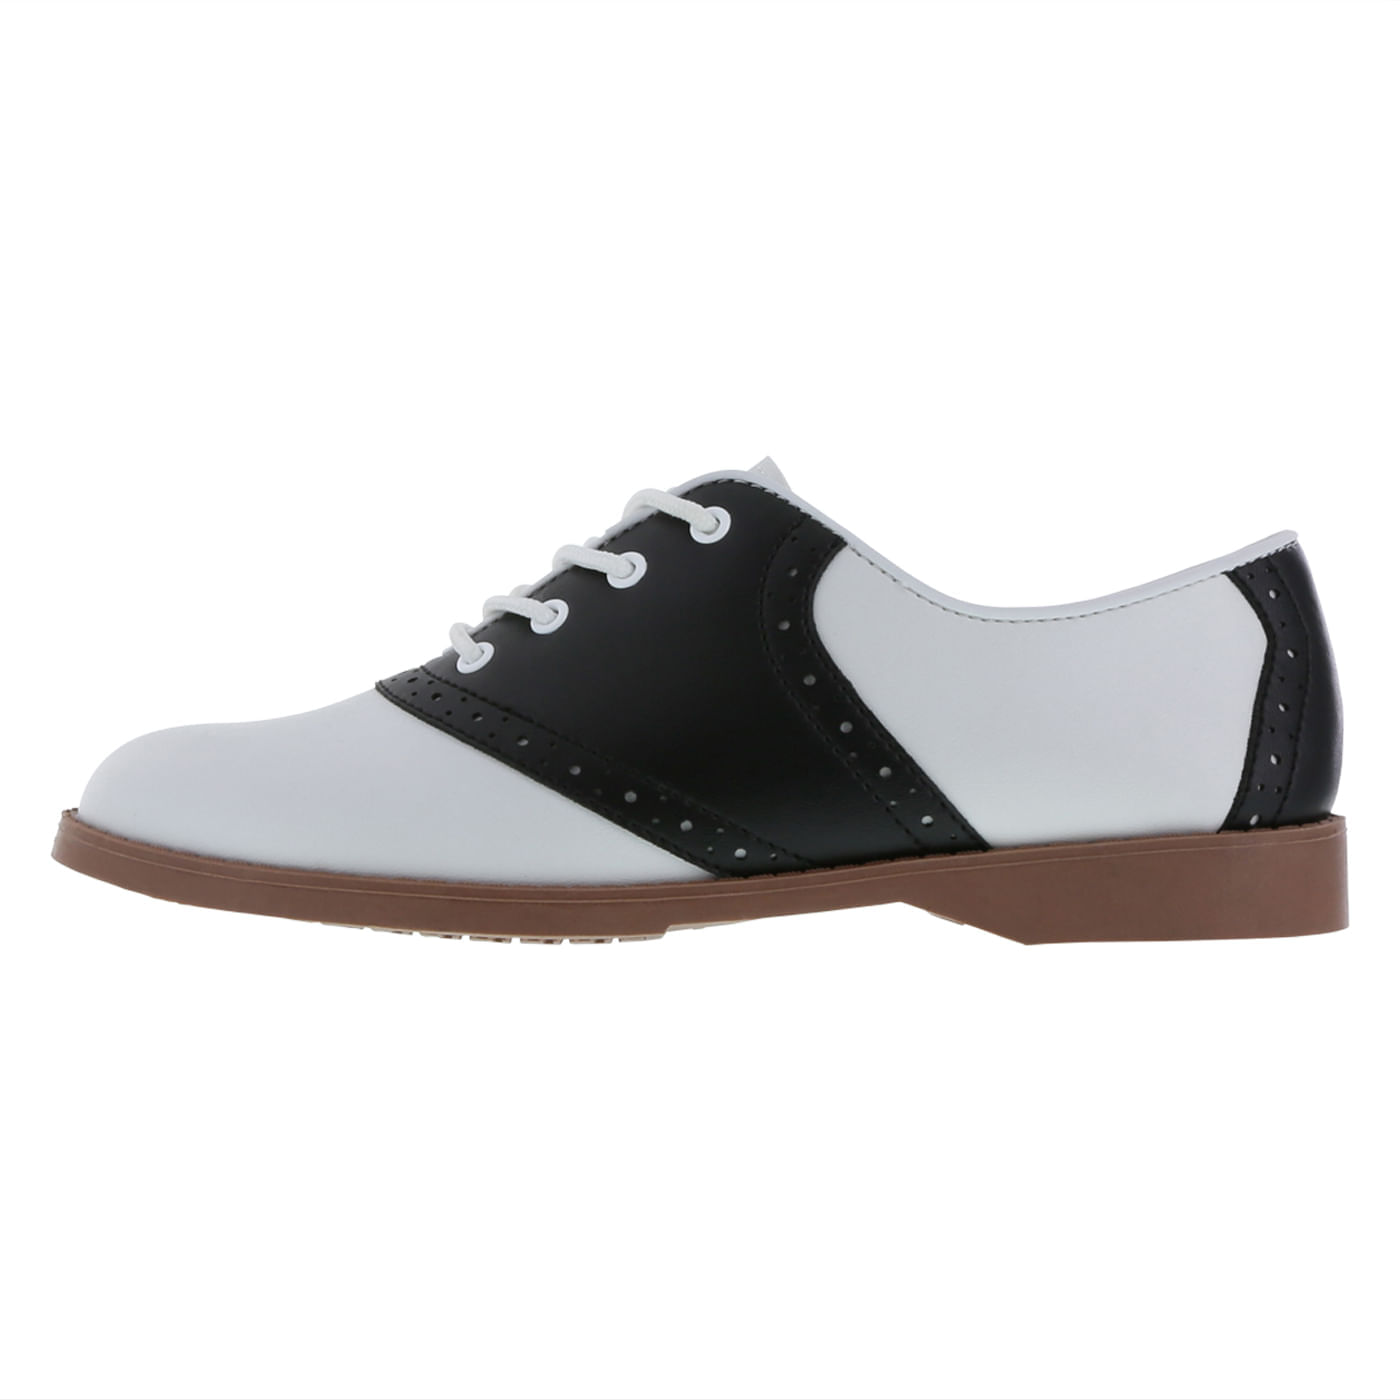 payless shoes saddle shoes